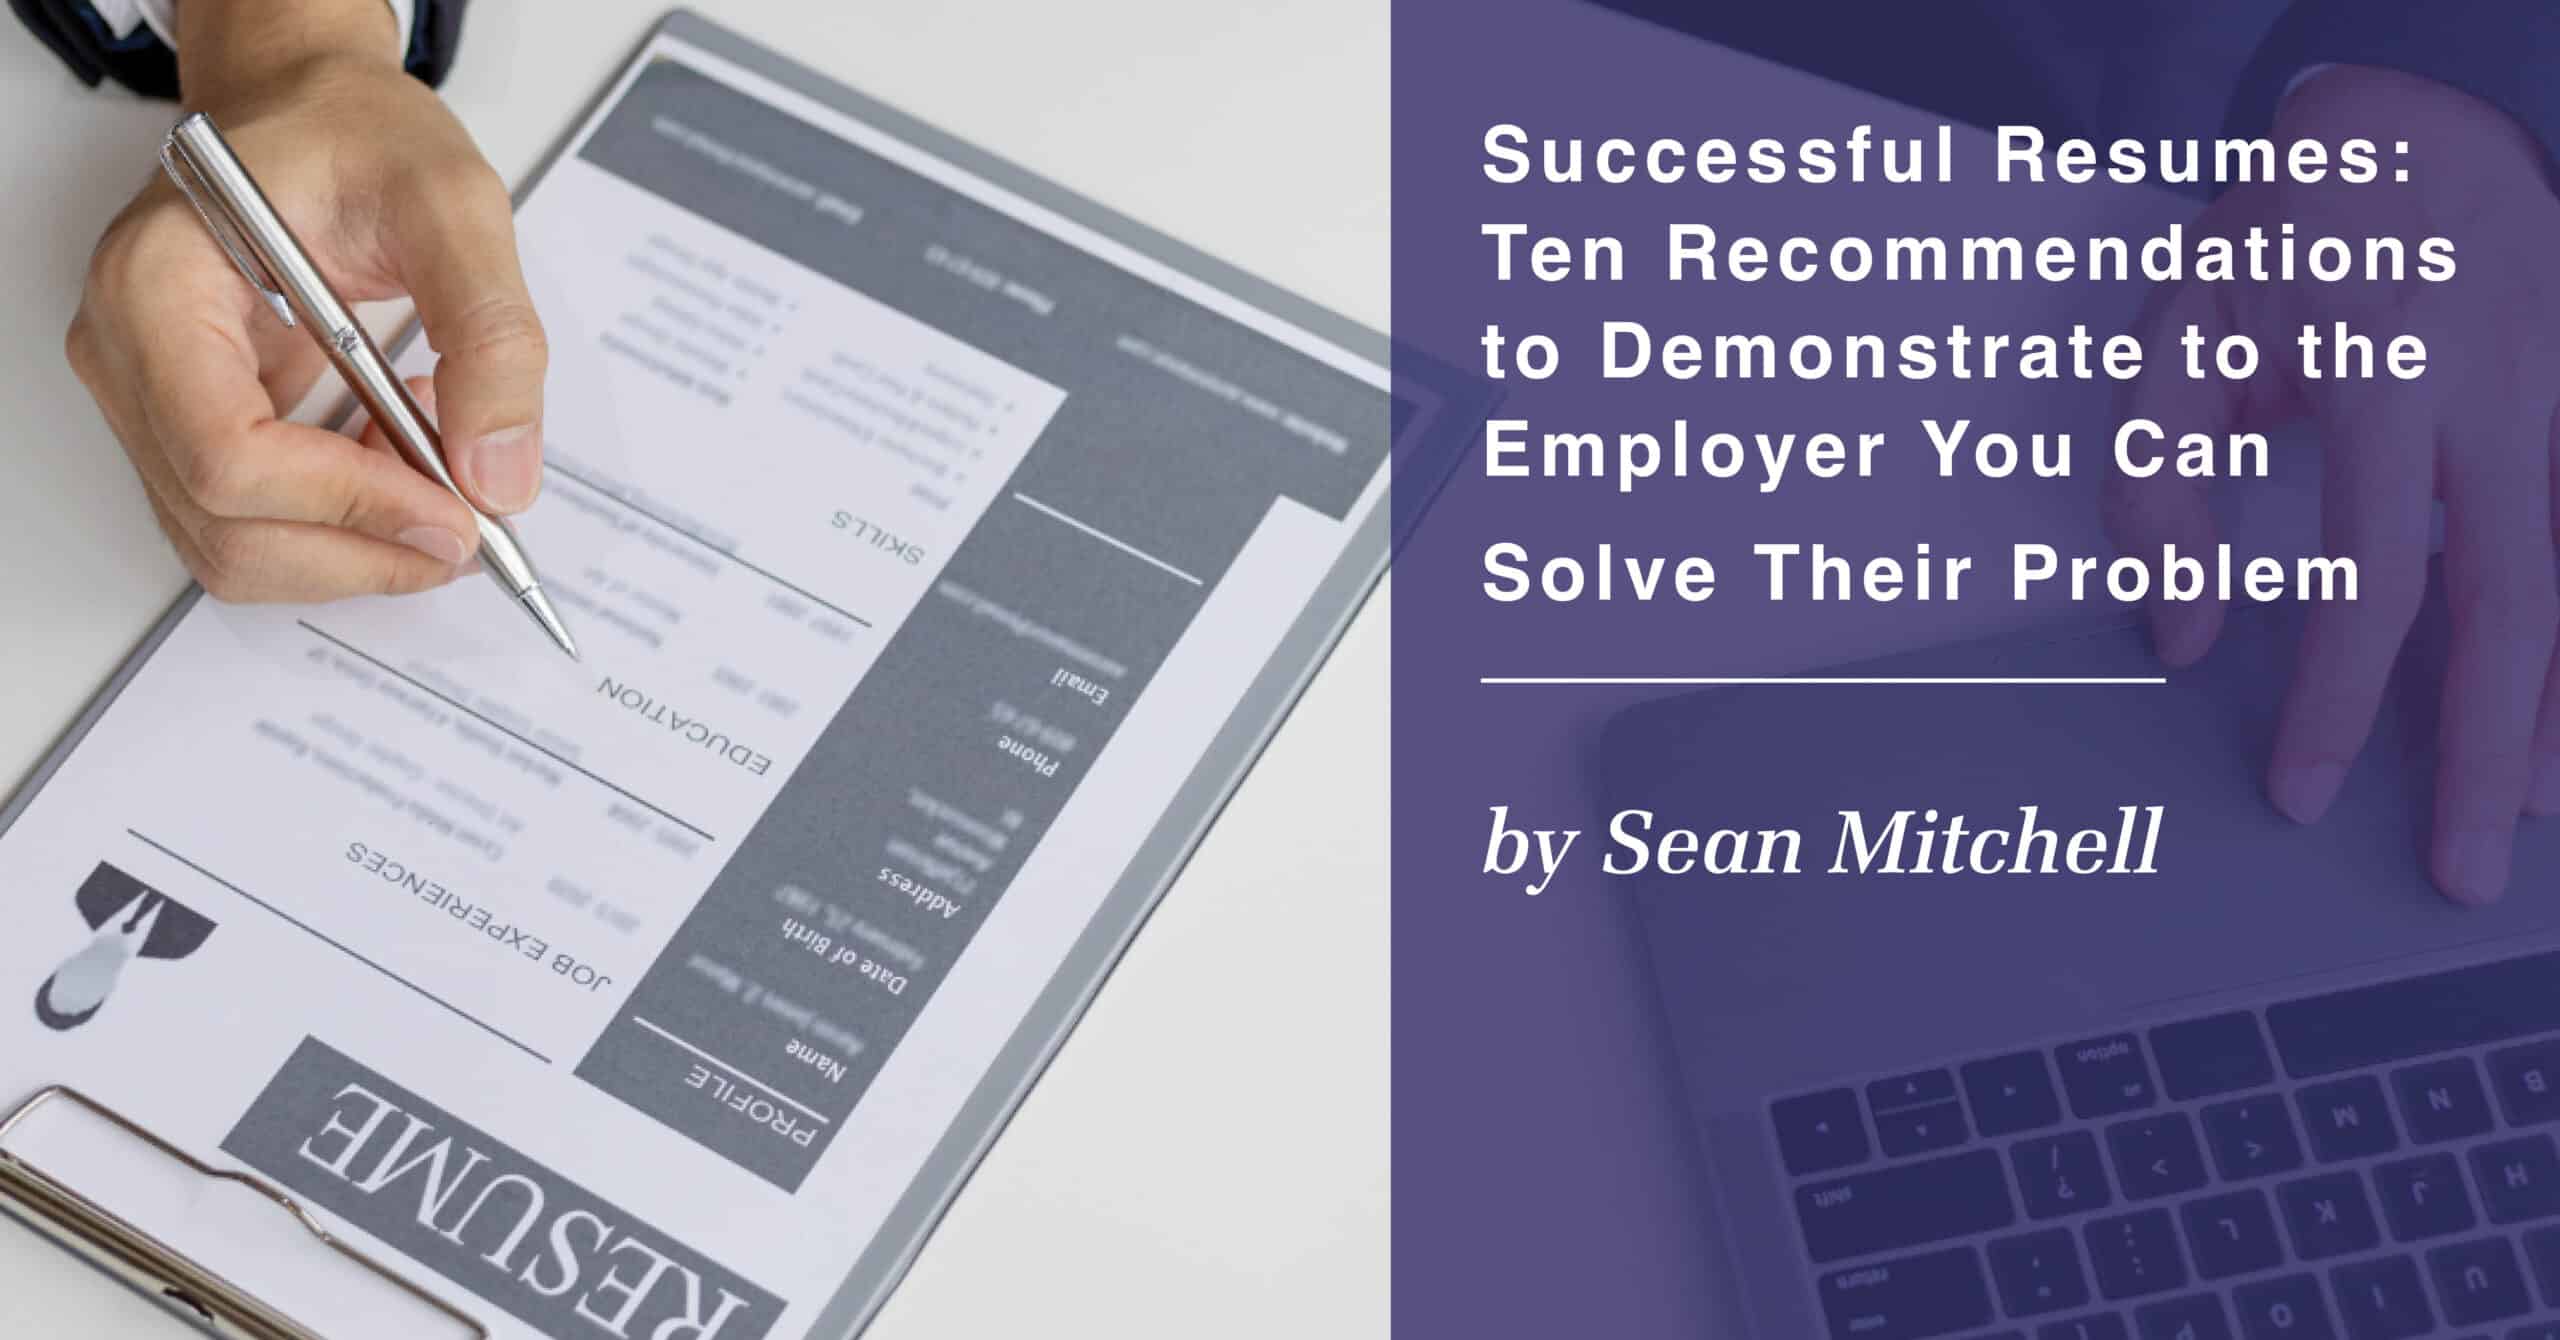 Successful Resumes: Ten Recommendations to Demonstrate to the Employer You Can Solve Their Problem